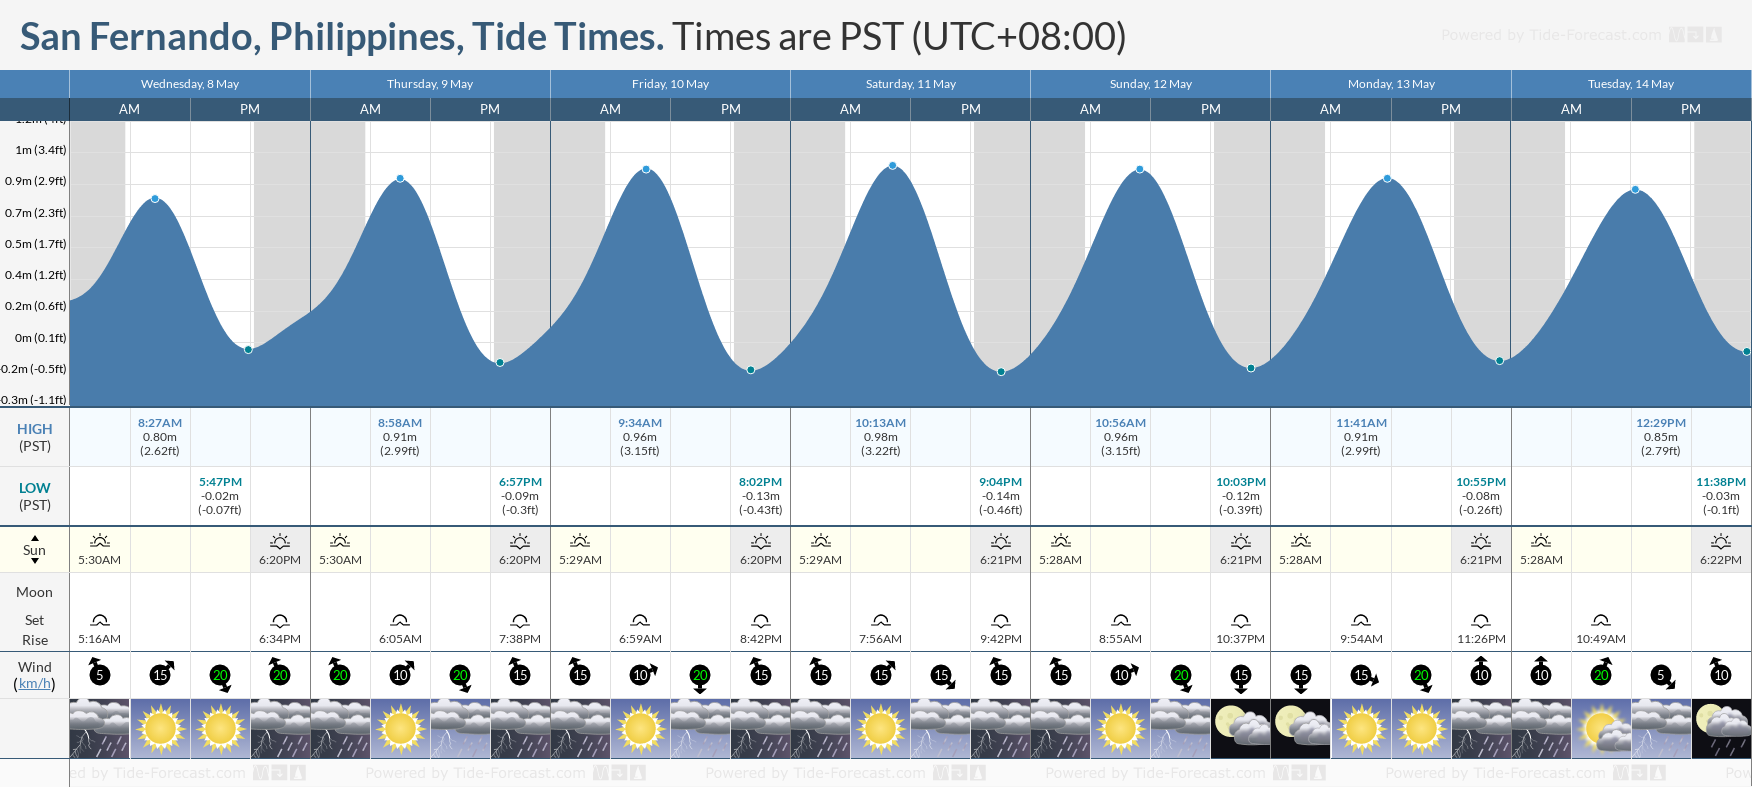 San Fernando, Philippines Tide Chart including high and low tide tide times for the next 7 days